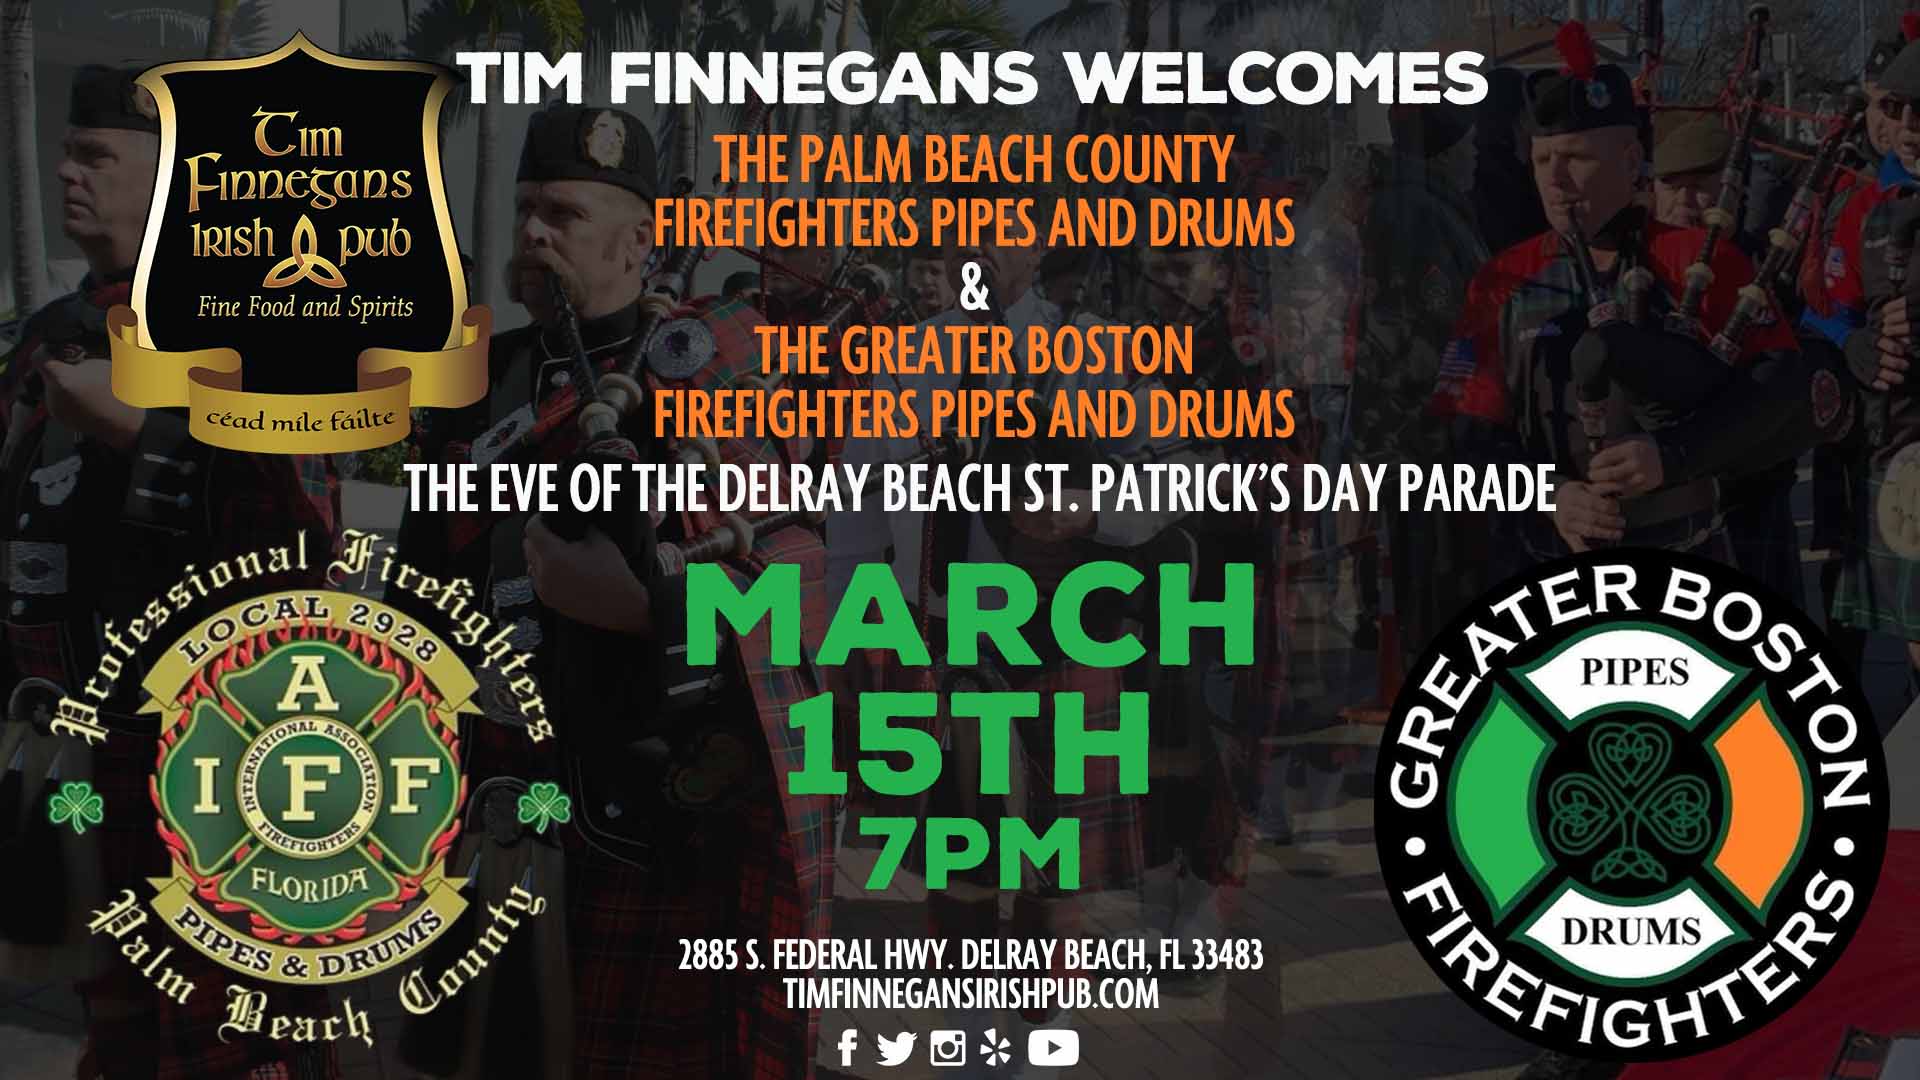 March 15th 7PM - Palm Beach County Firefighters & The Greater Boston Firefighters Pipes & Drums